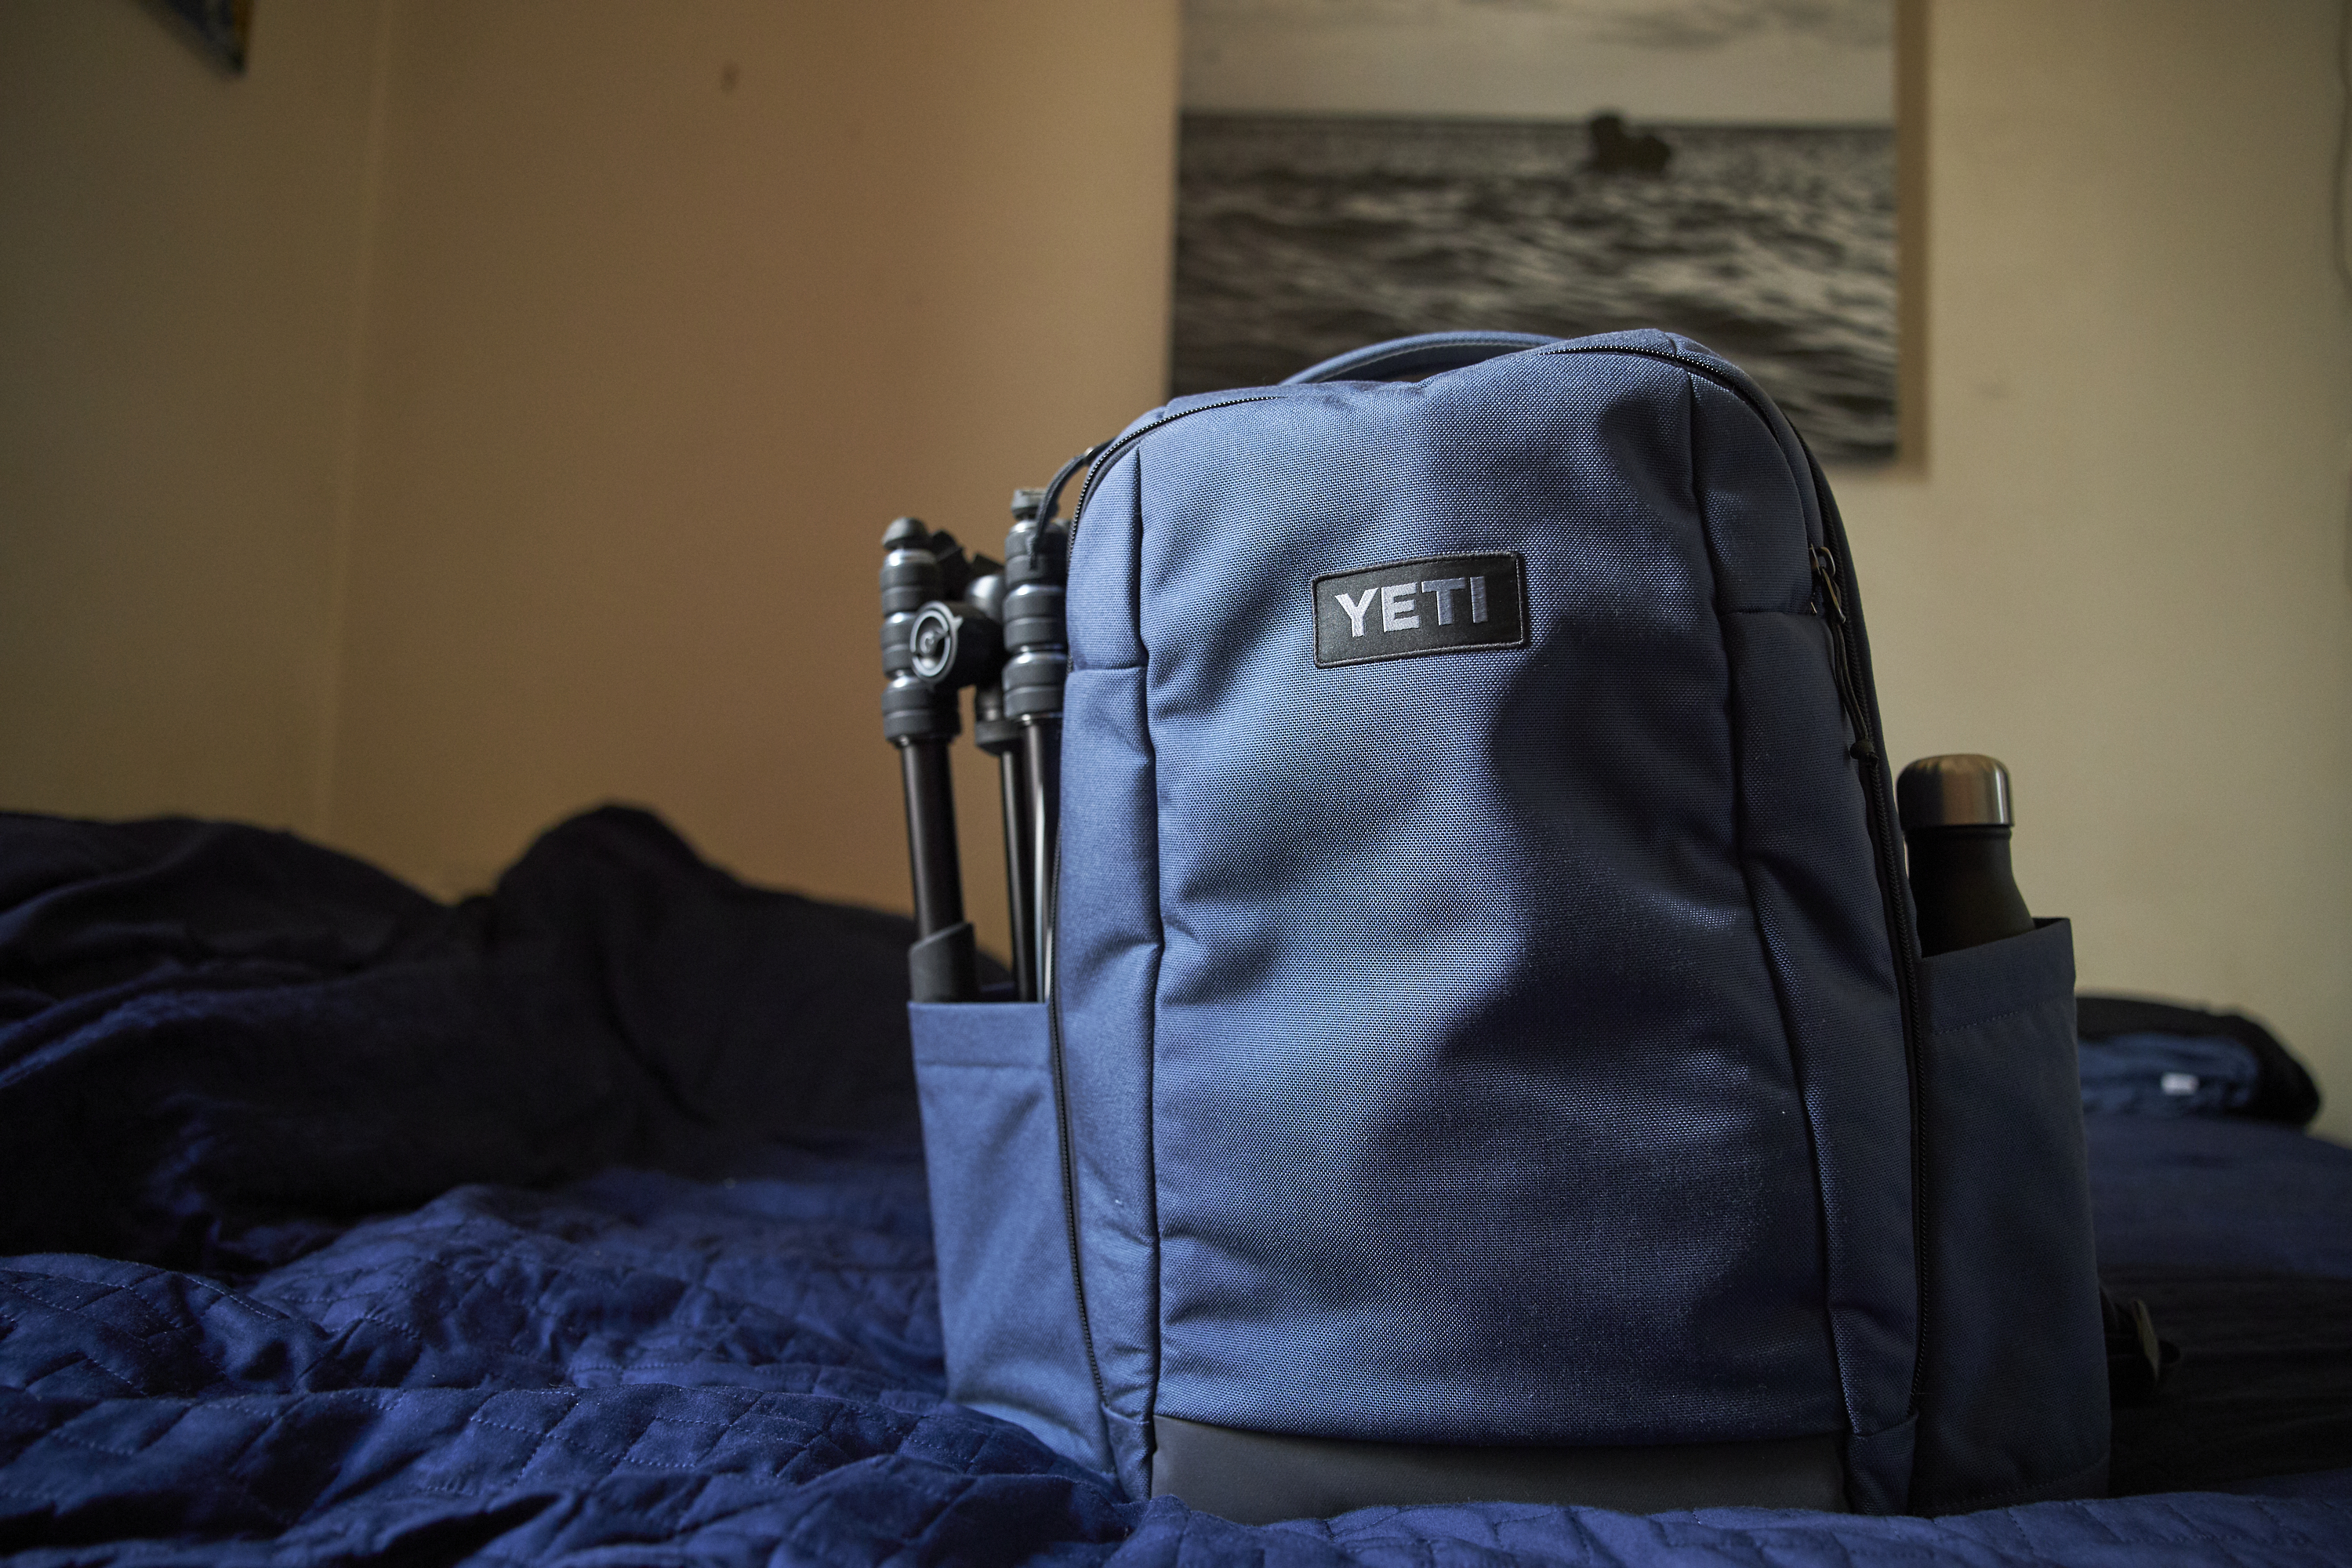 https://www.thephoblographer.com/wp-content/uploads/2019/10/Chris-Gampat-The-Phoblographer-Yeti-Crossroads-Backpack-23-review-product-Images-2.81-50s1600-3.jpg